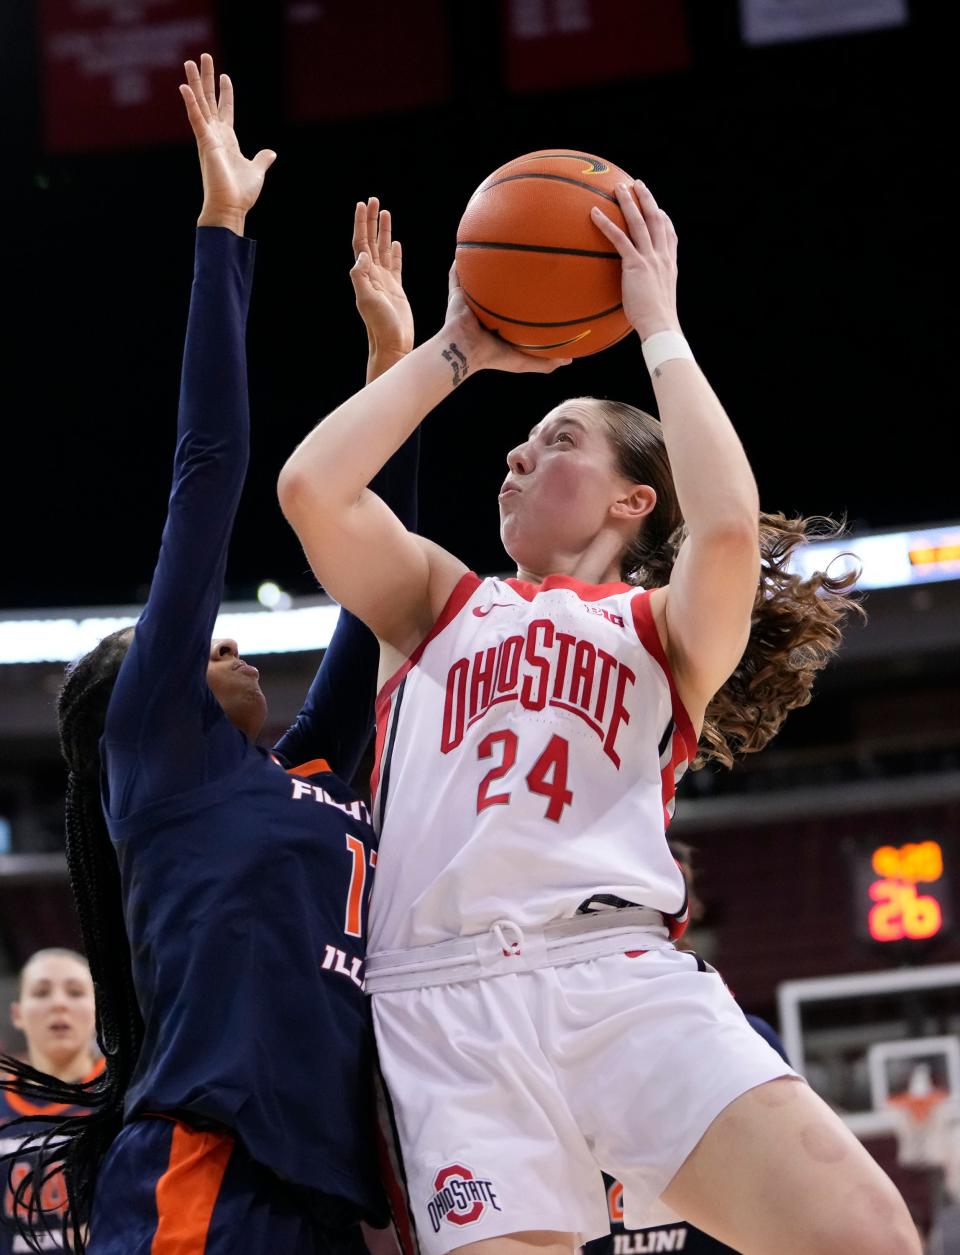 Ohio State guard Taylor Mikesell shoots over Illinois guard Jayla Oden during the fourth quarter at Value City Arena in Columbus on Jan. 6, 2022. Ohio State won 90-69.